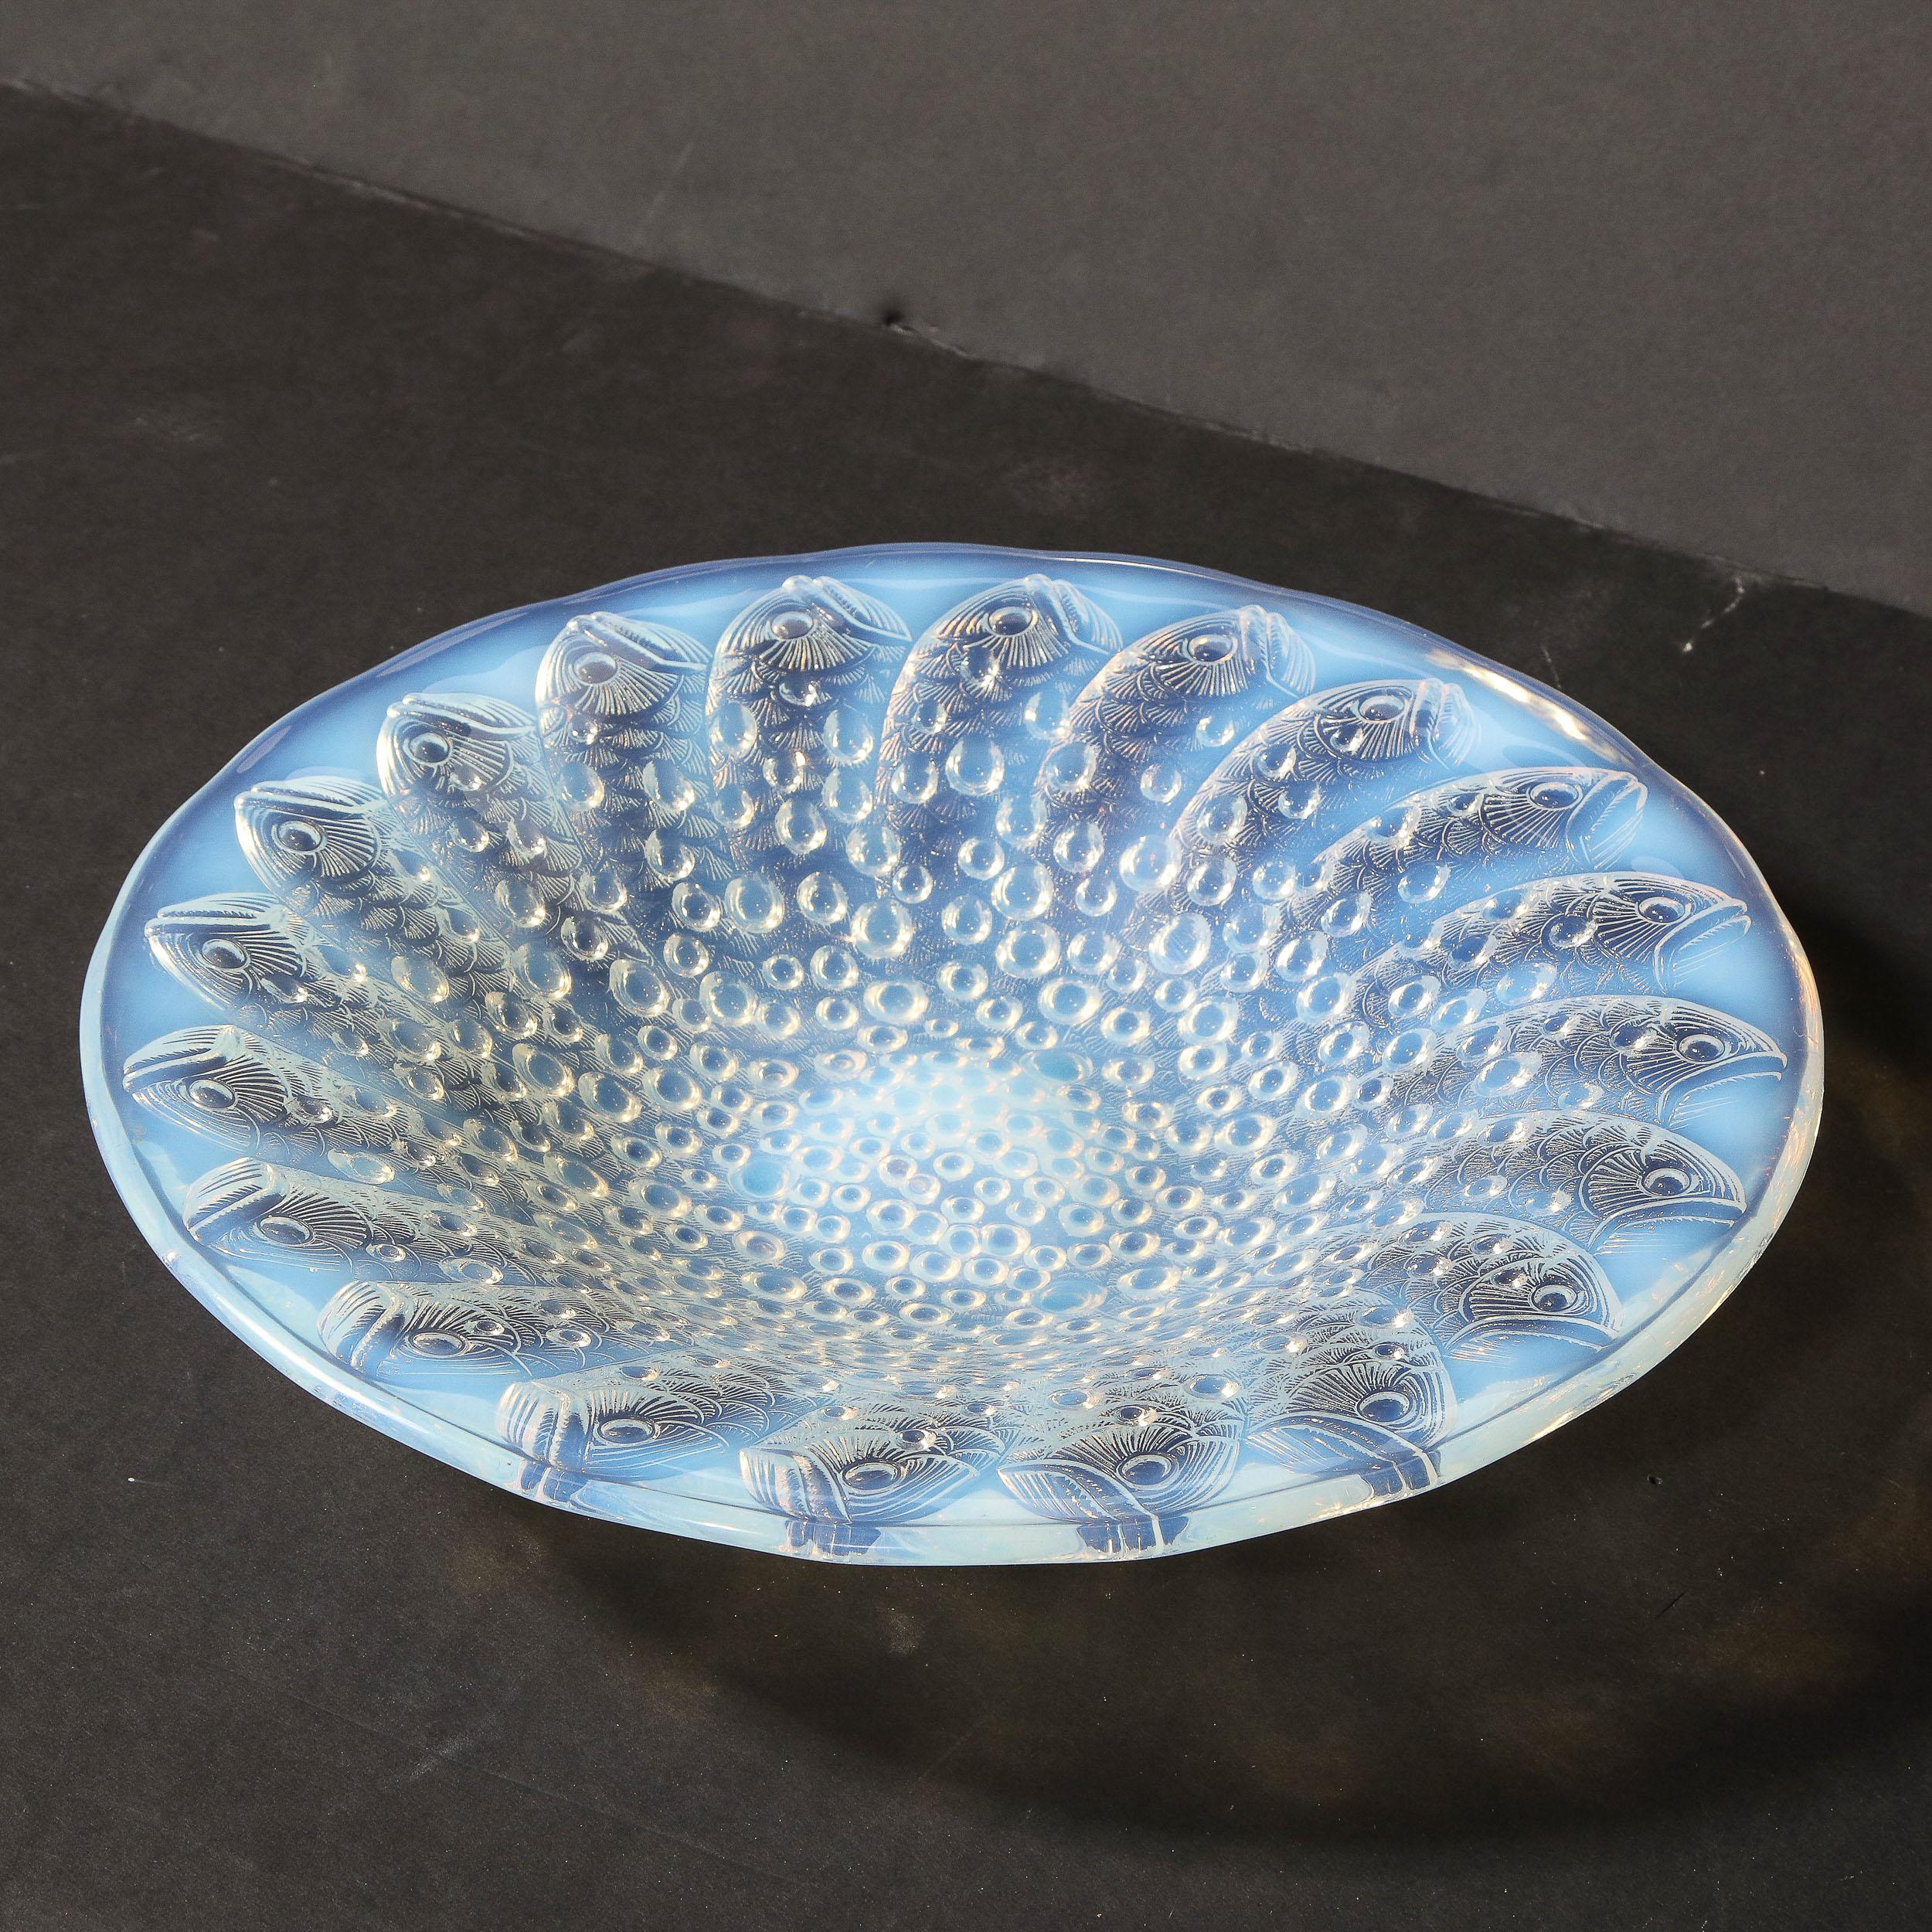 This stunning Art Deco center bowl was realized by the legendary maker Lalique in France circa 1925. Created in a beautiful opalescent glass, the piece offers a repeating concentric stylized fish motif as well as spherical detailing in relief. With